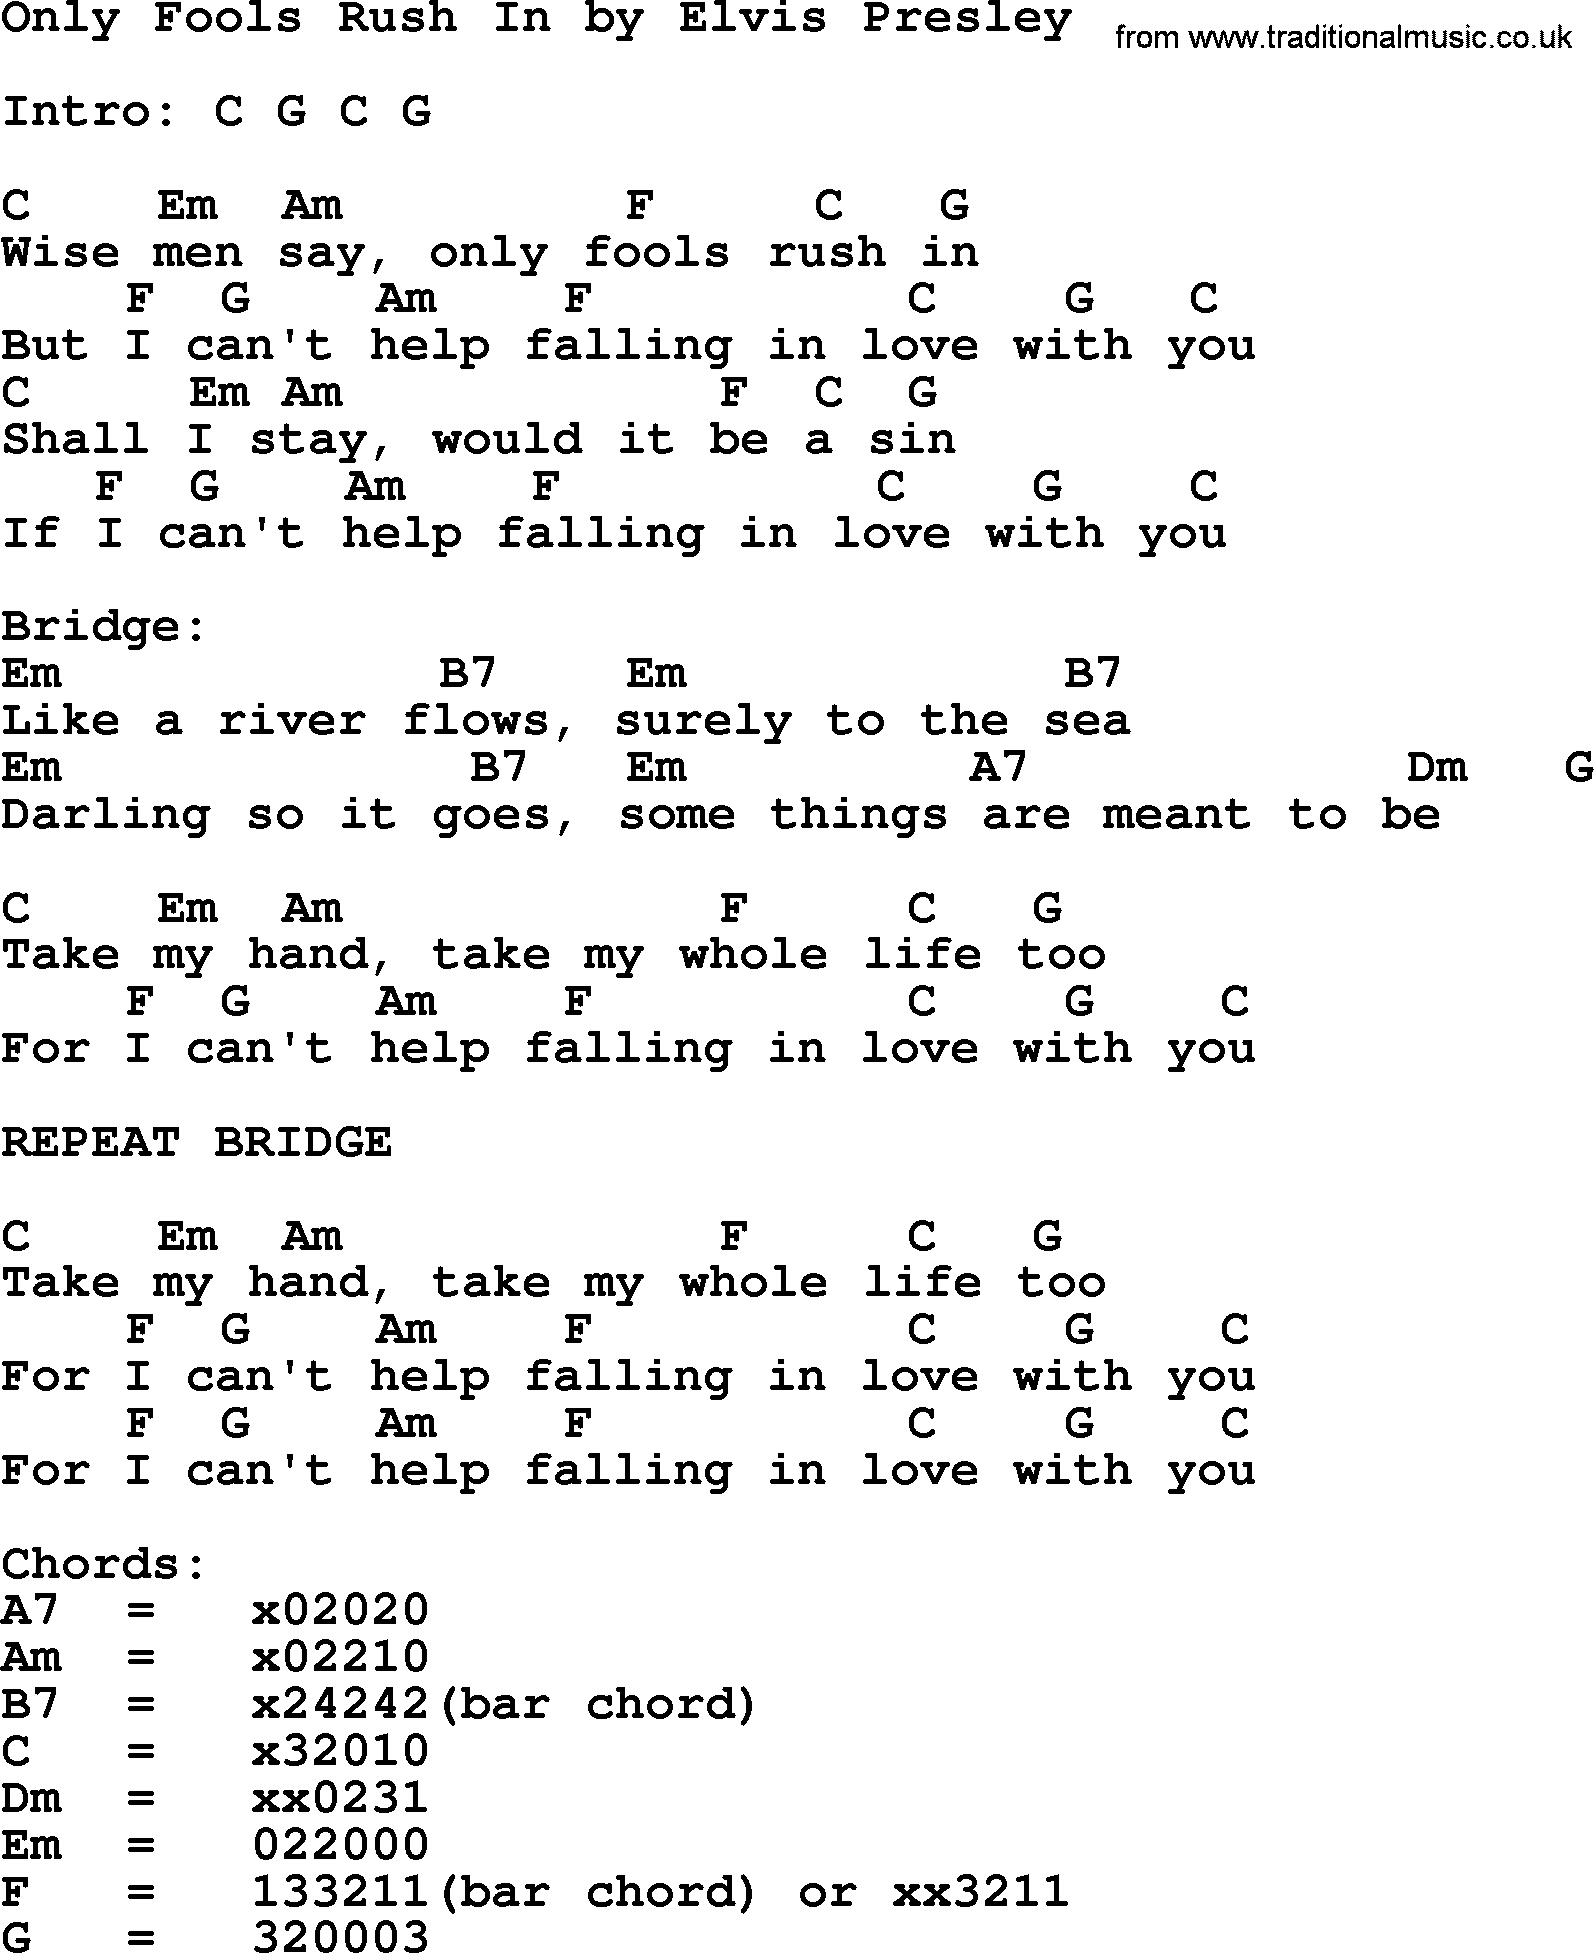 Elvis Presley song: Only Fools Rush In, lyrics and chords